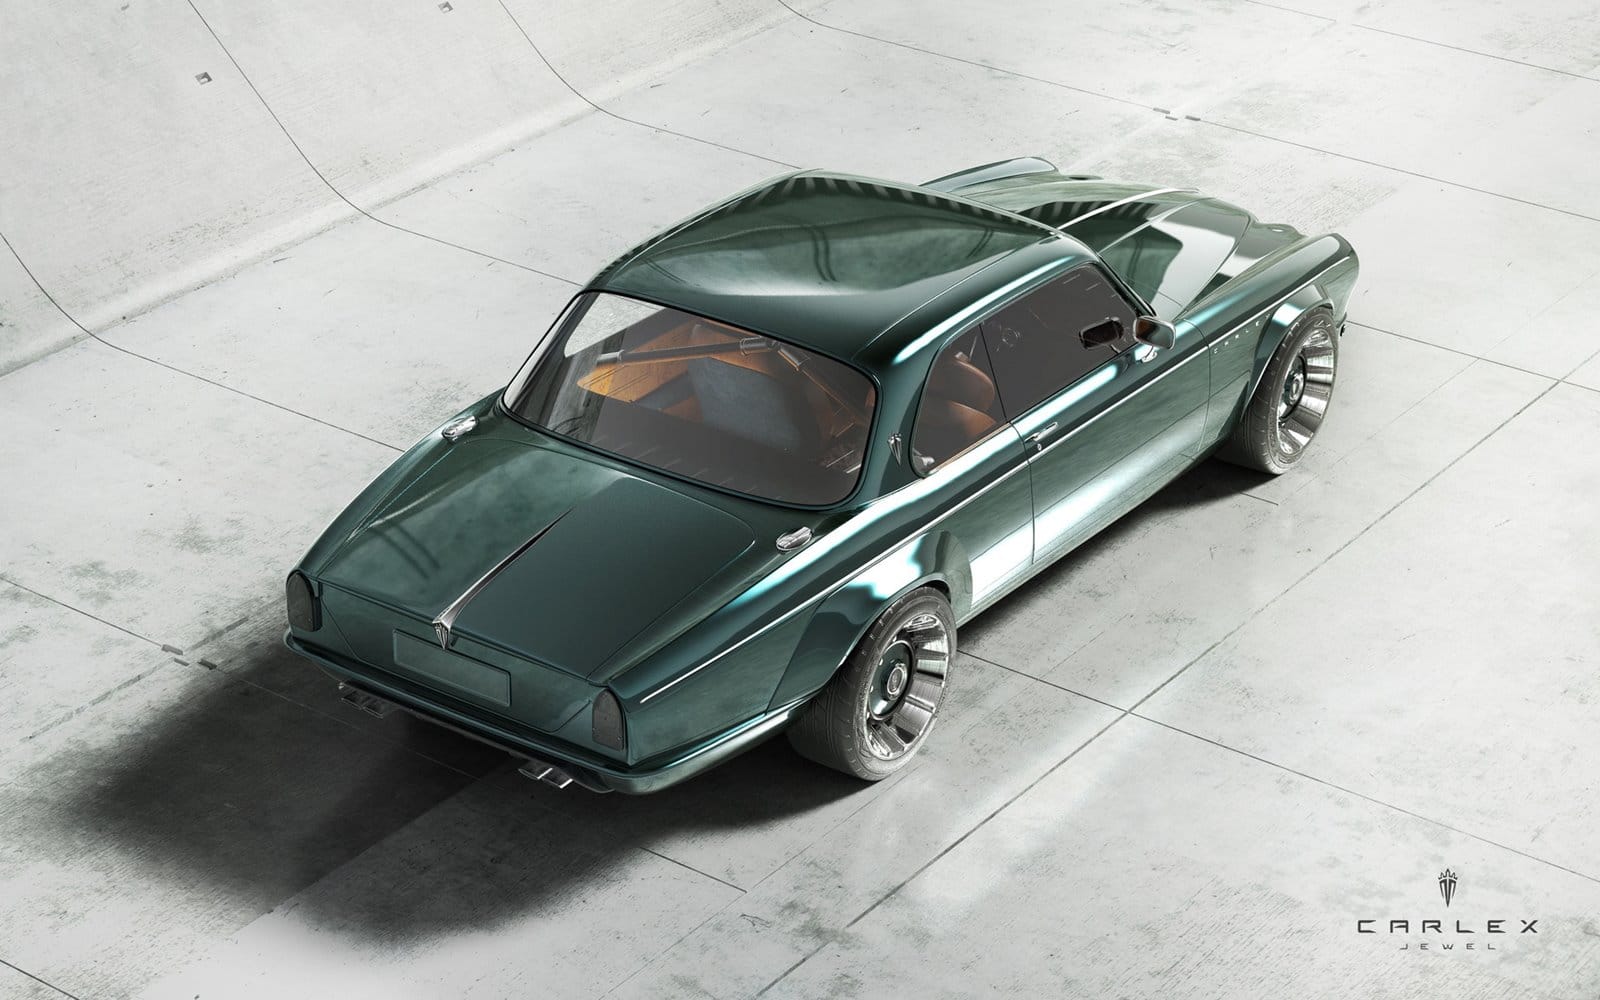 Carlex Design's Jaguar XJ-C is the best you'll see today